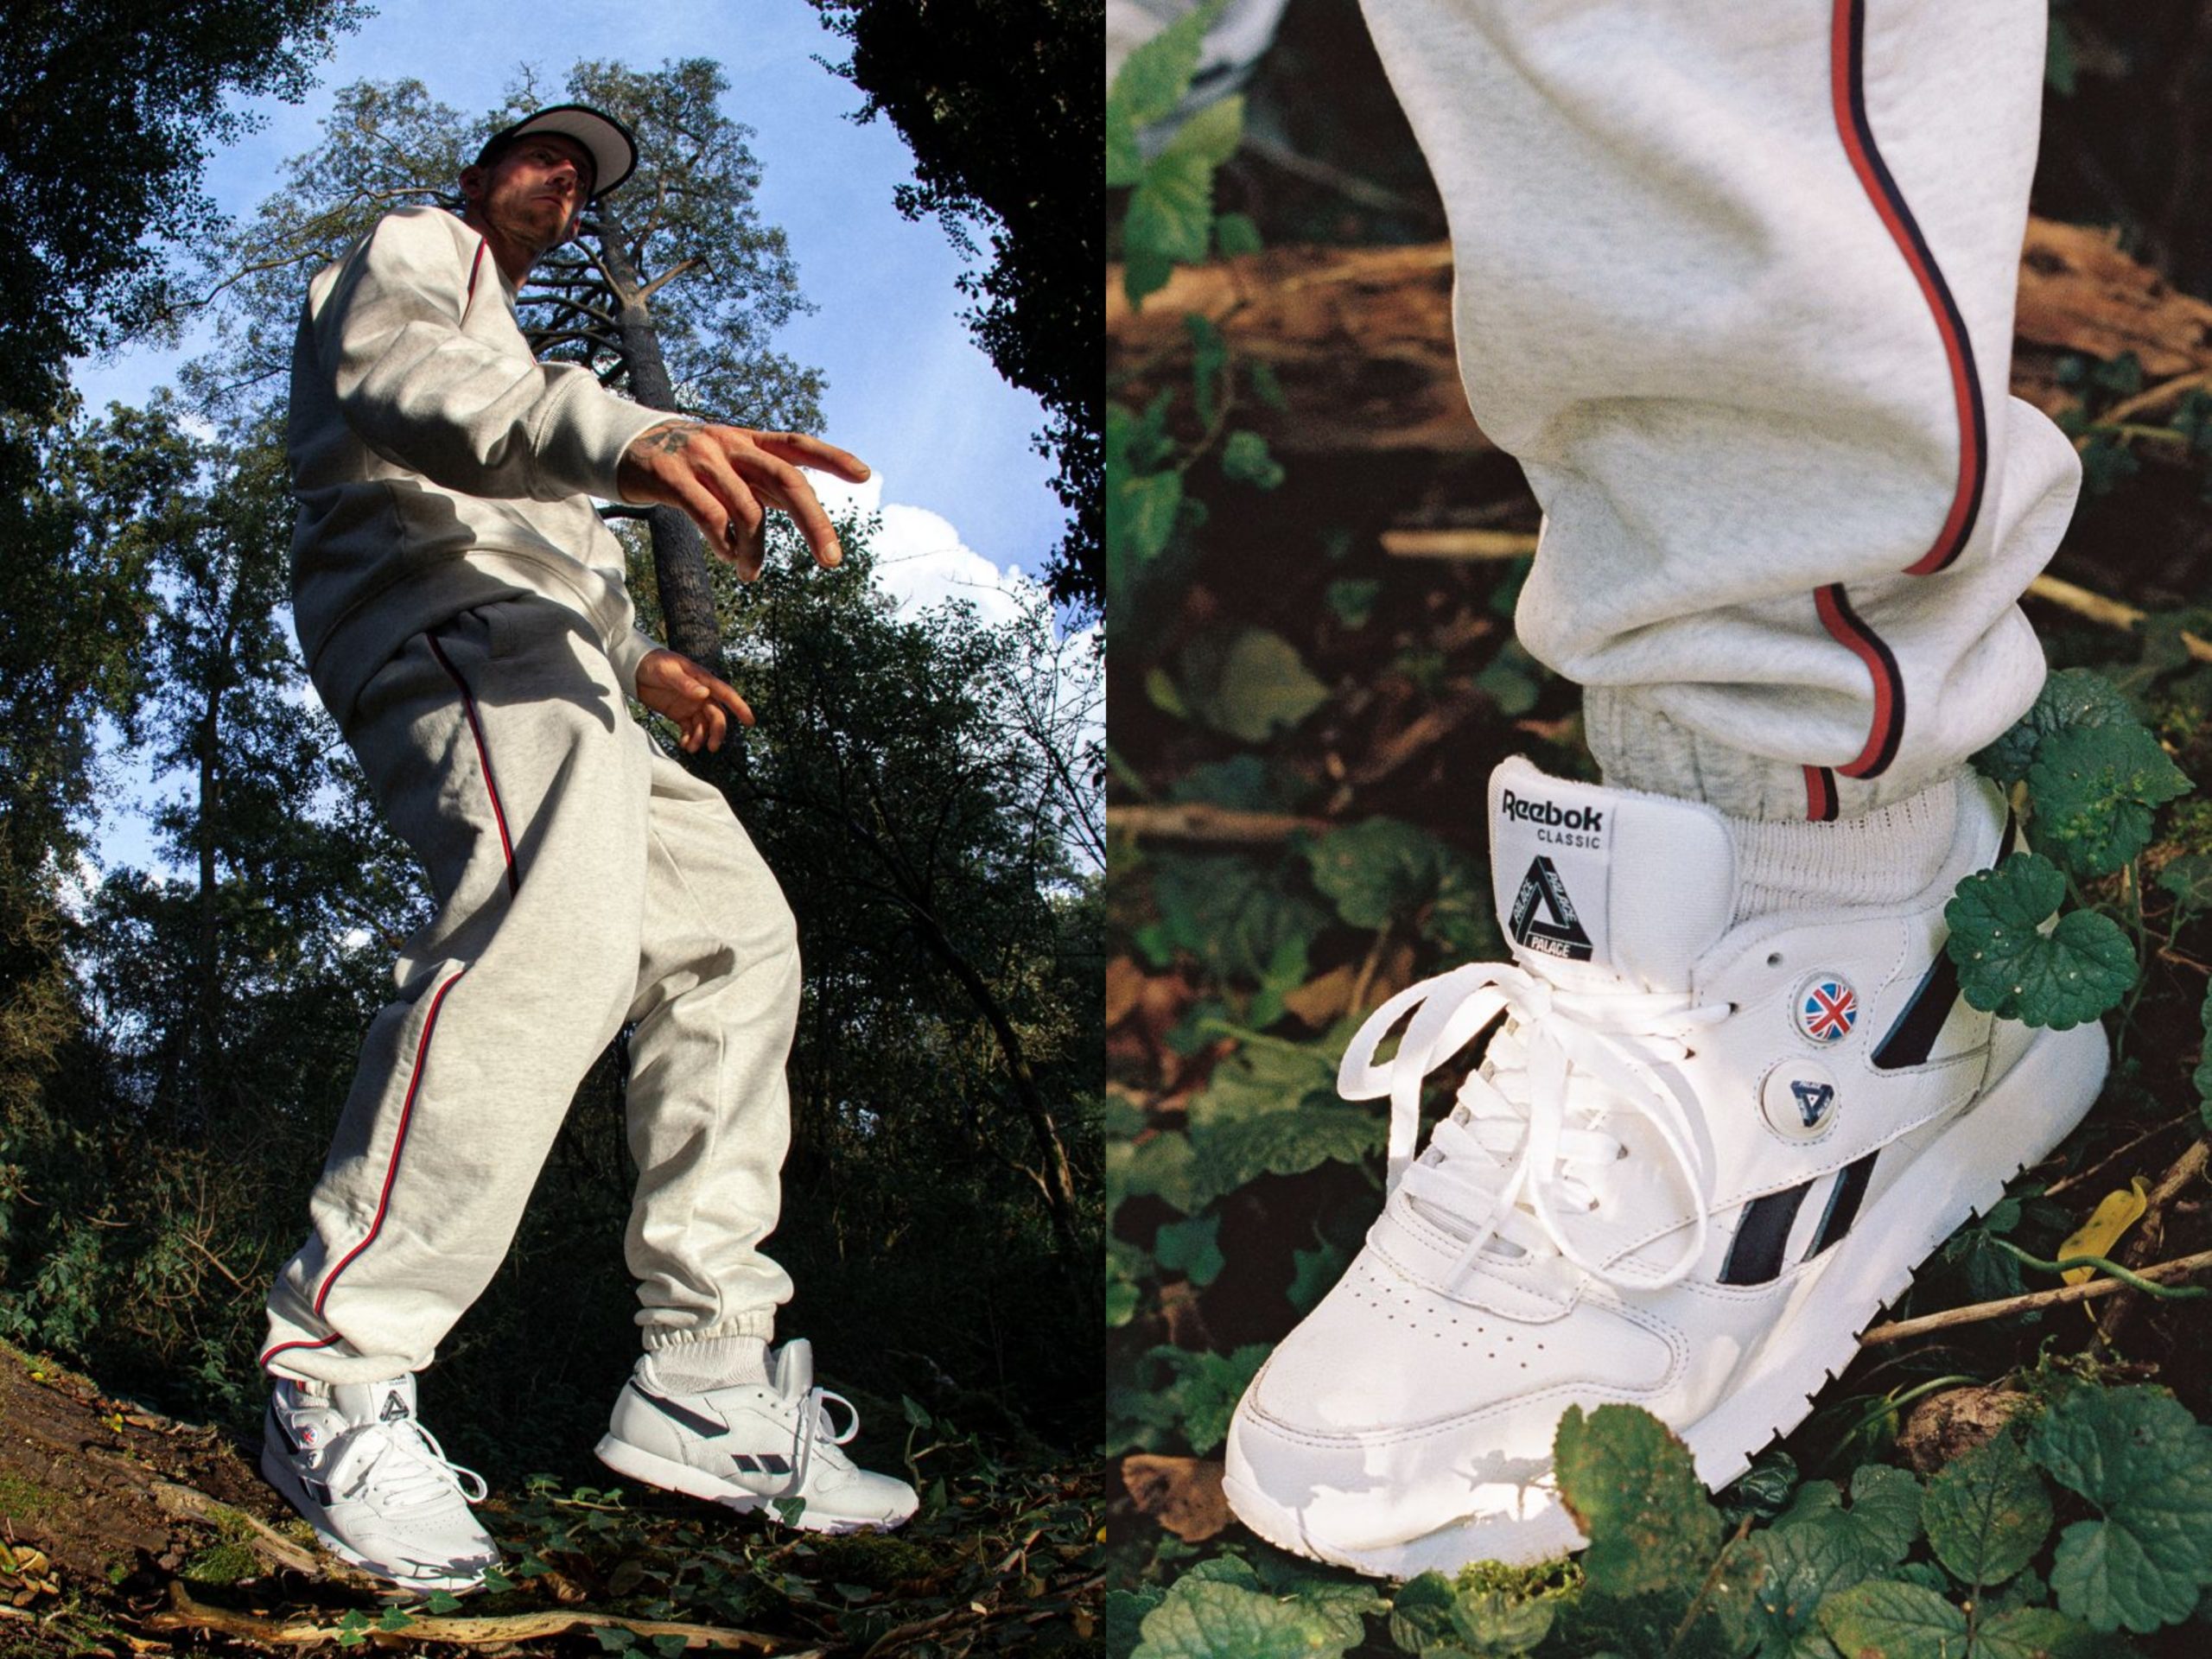 Palace x Reebok Release Footwear and Apparel Collaboration